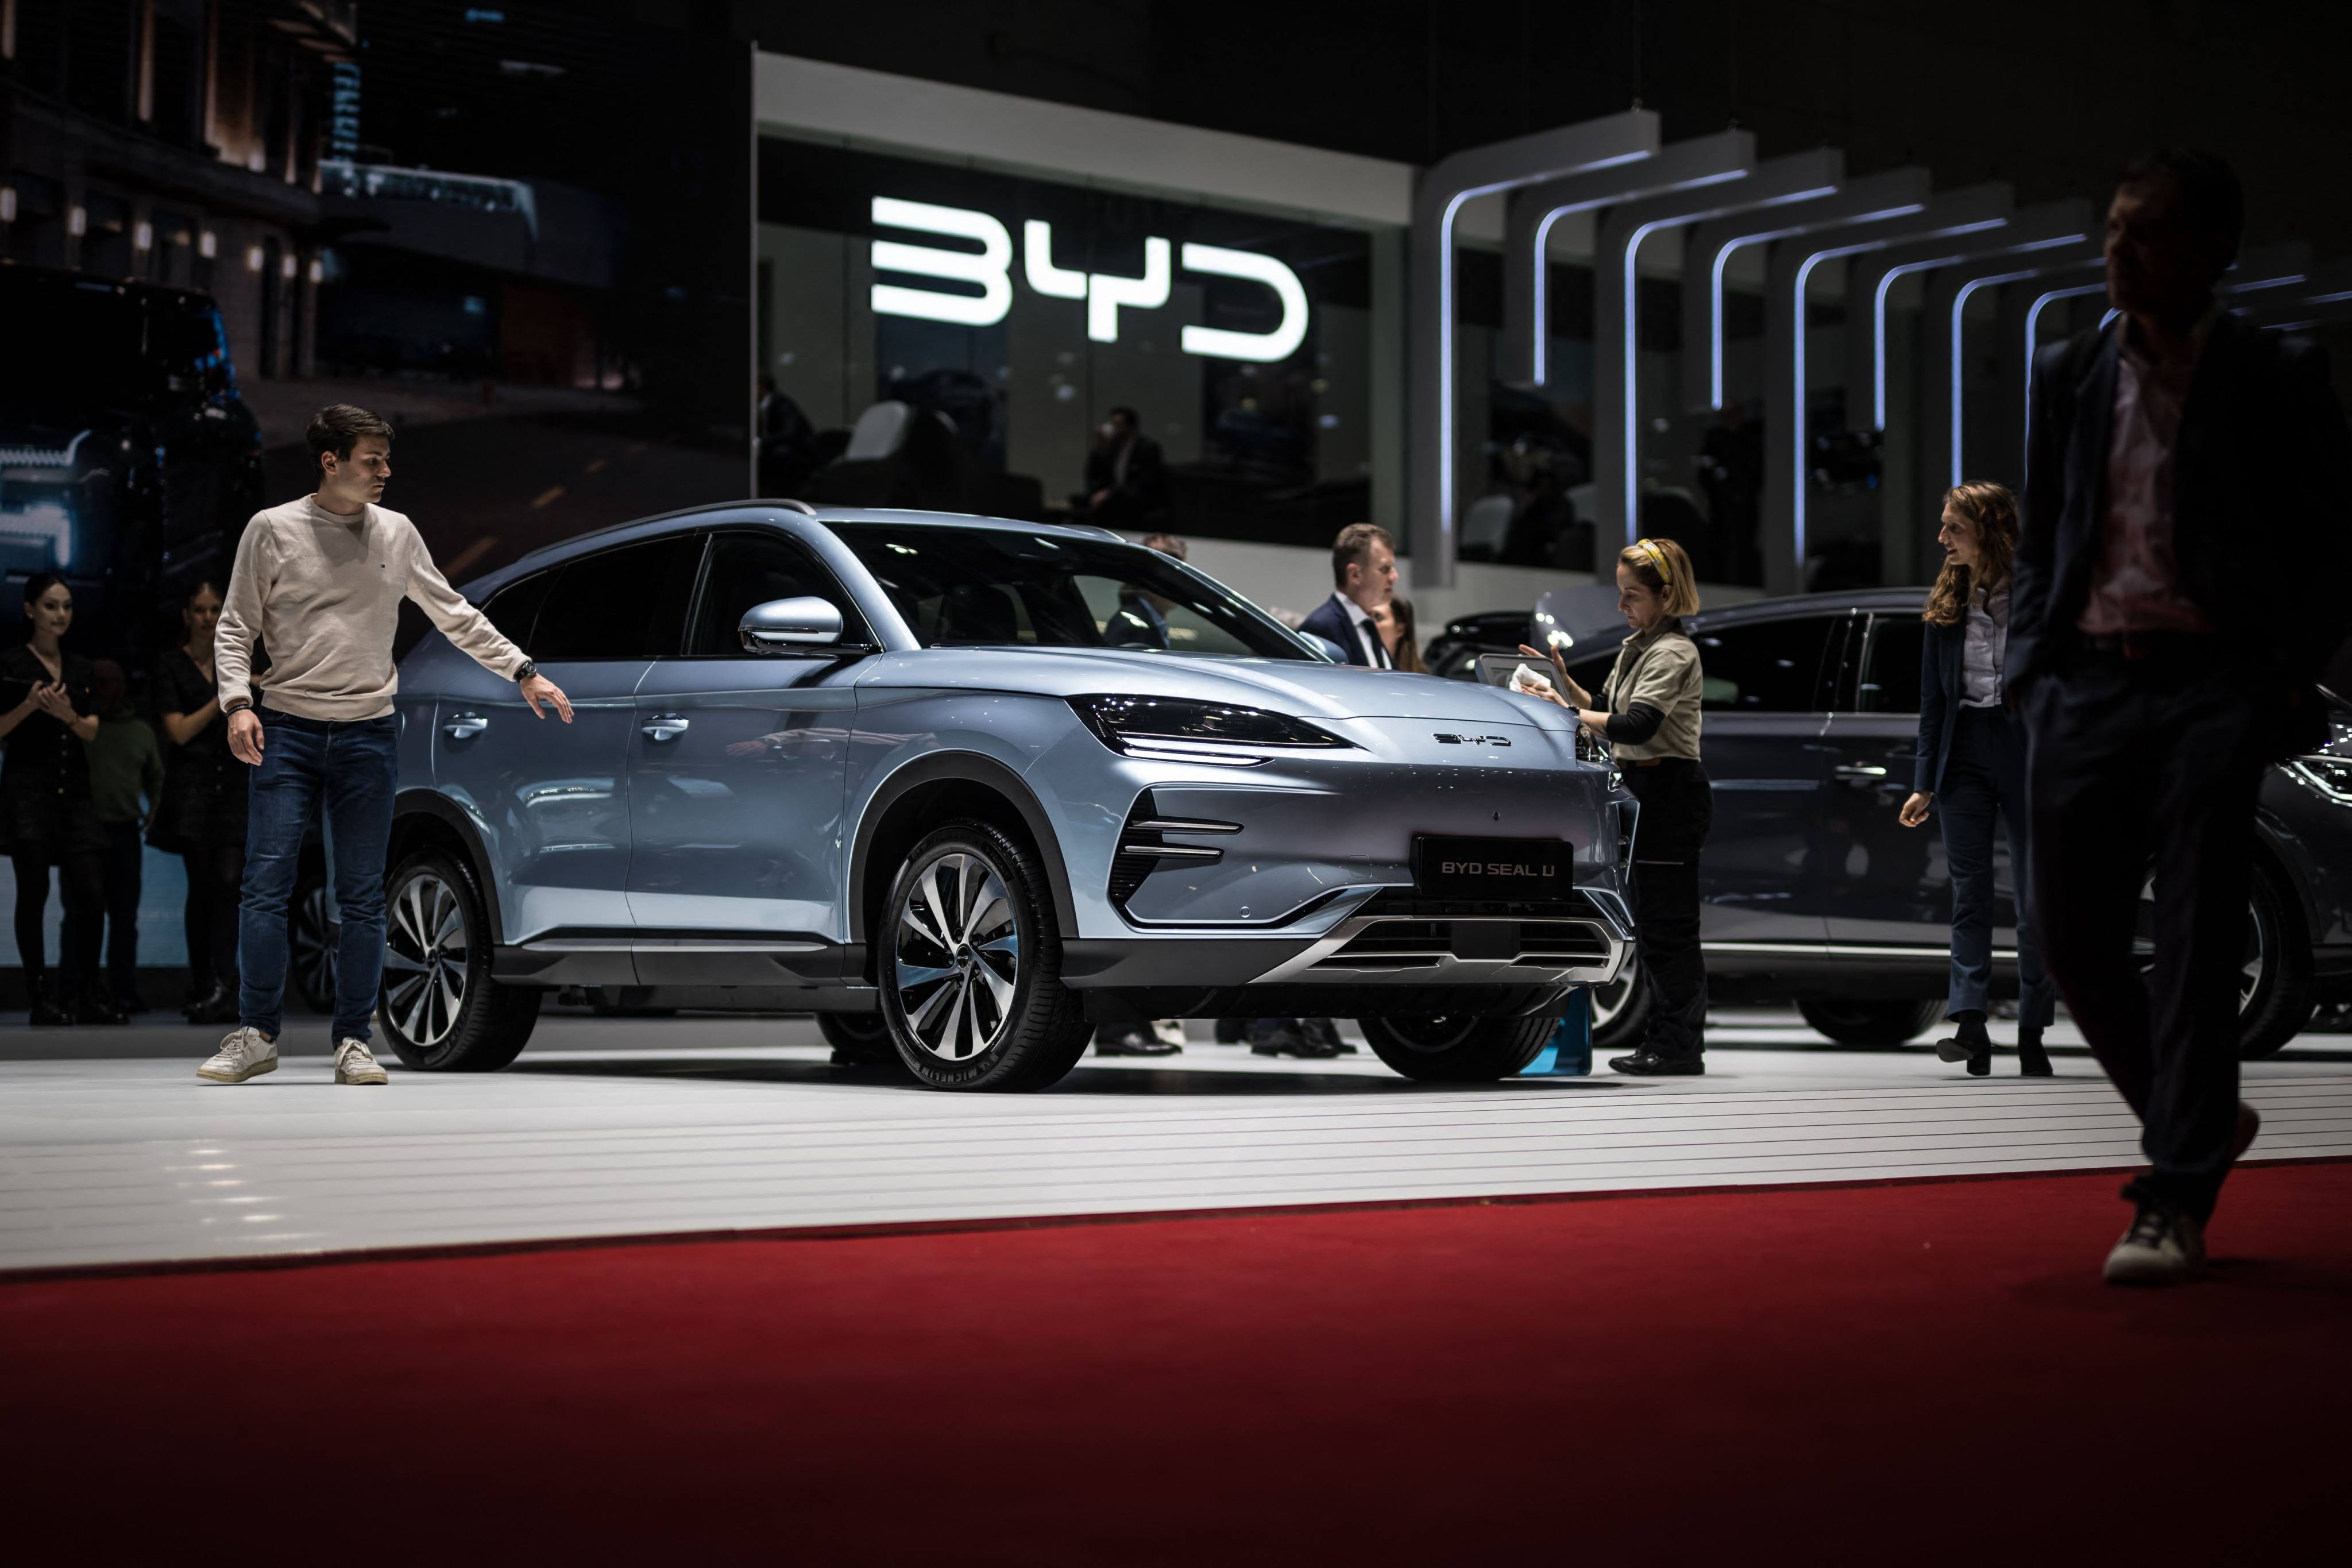 BYD launched the Seal EV in India on Tuesday. Photo: AFP